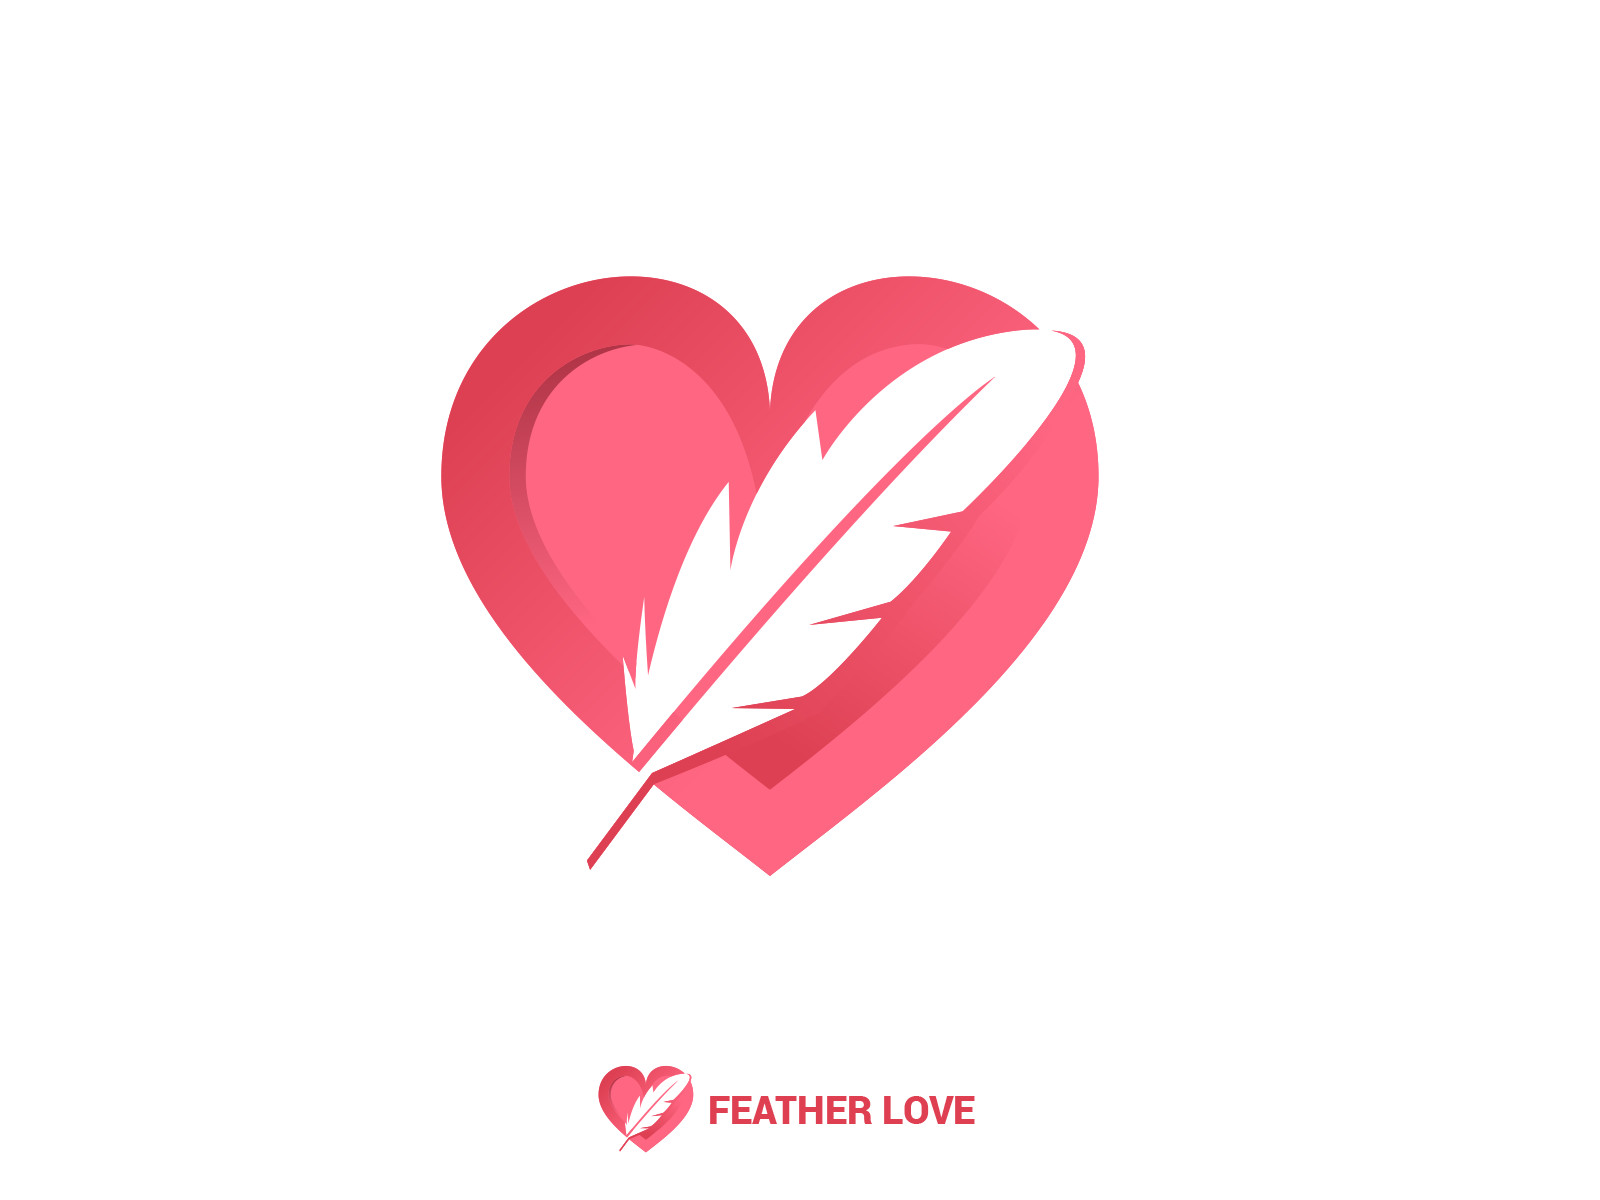 Feather Love Logo Design By Rawiman On Dribbble